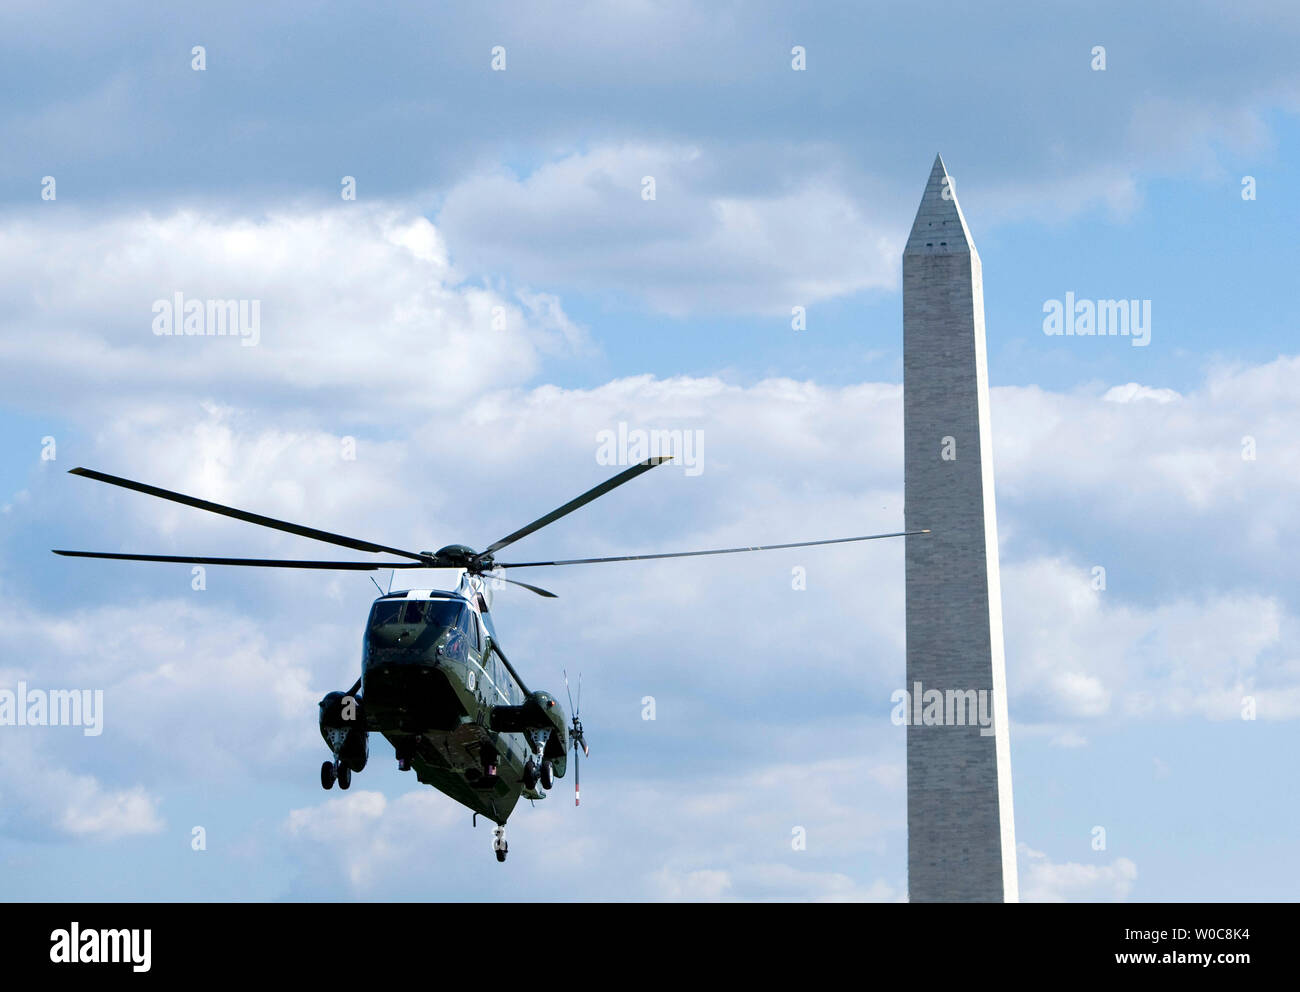 Marine One carrying U.S. President George W. Bush lands on the South Lawn of the White House in Washington on August 11, 2008. Bush has returned from attending some of the 2008 Olympics Games in Beijing. (UPI Photo/Patrick D. McDermott) Stock Photo